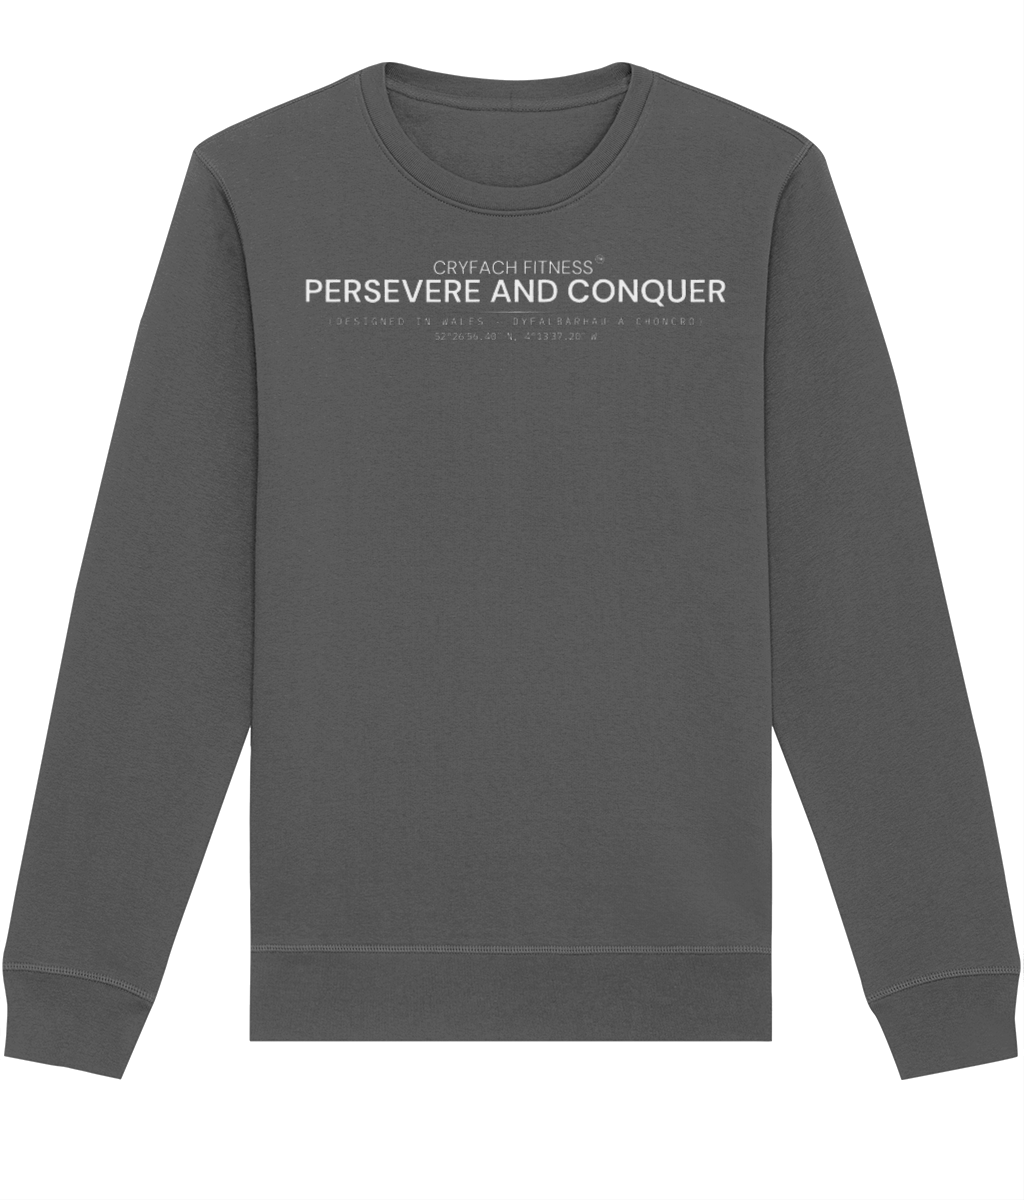 PERSEVERE AND CONQUER SWEATSHIRT